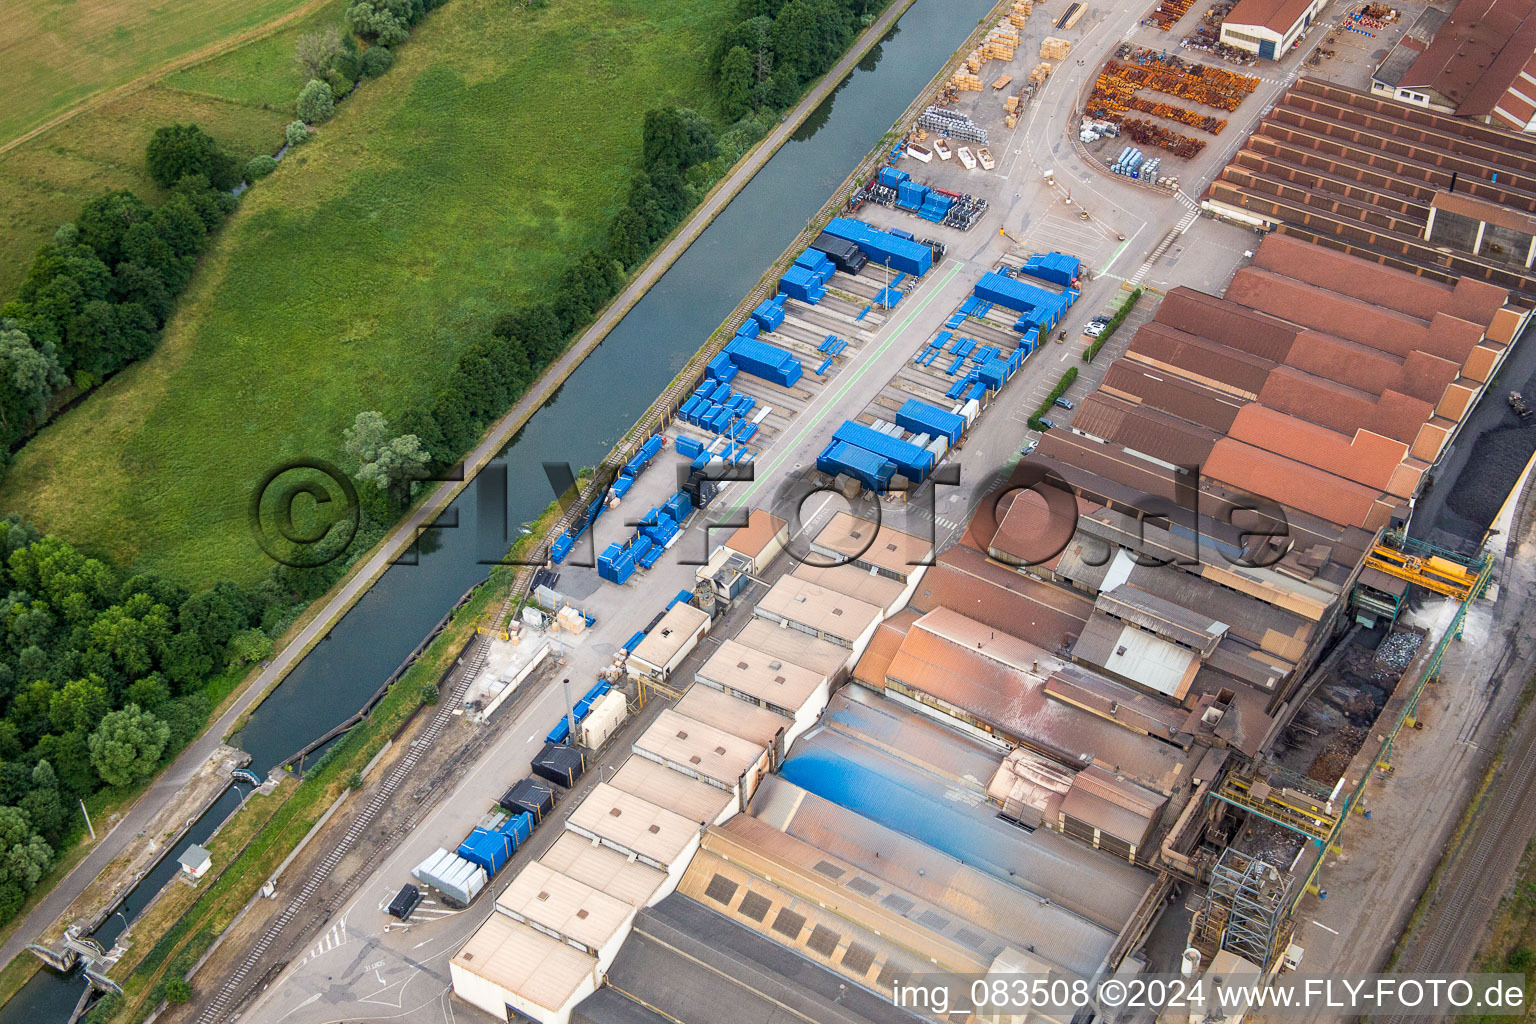 Aerial photograpy of Building and production halls on the premises of Foundery Saint Gobain PAM on Canal de la Marne au Rhin in Foug in Grand Est, France